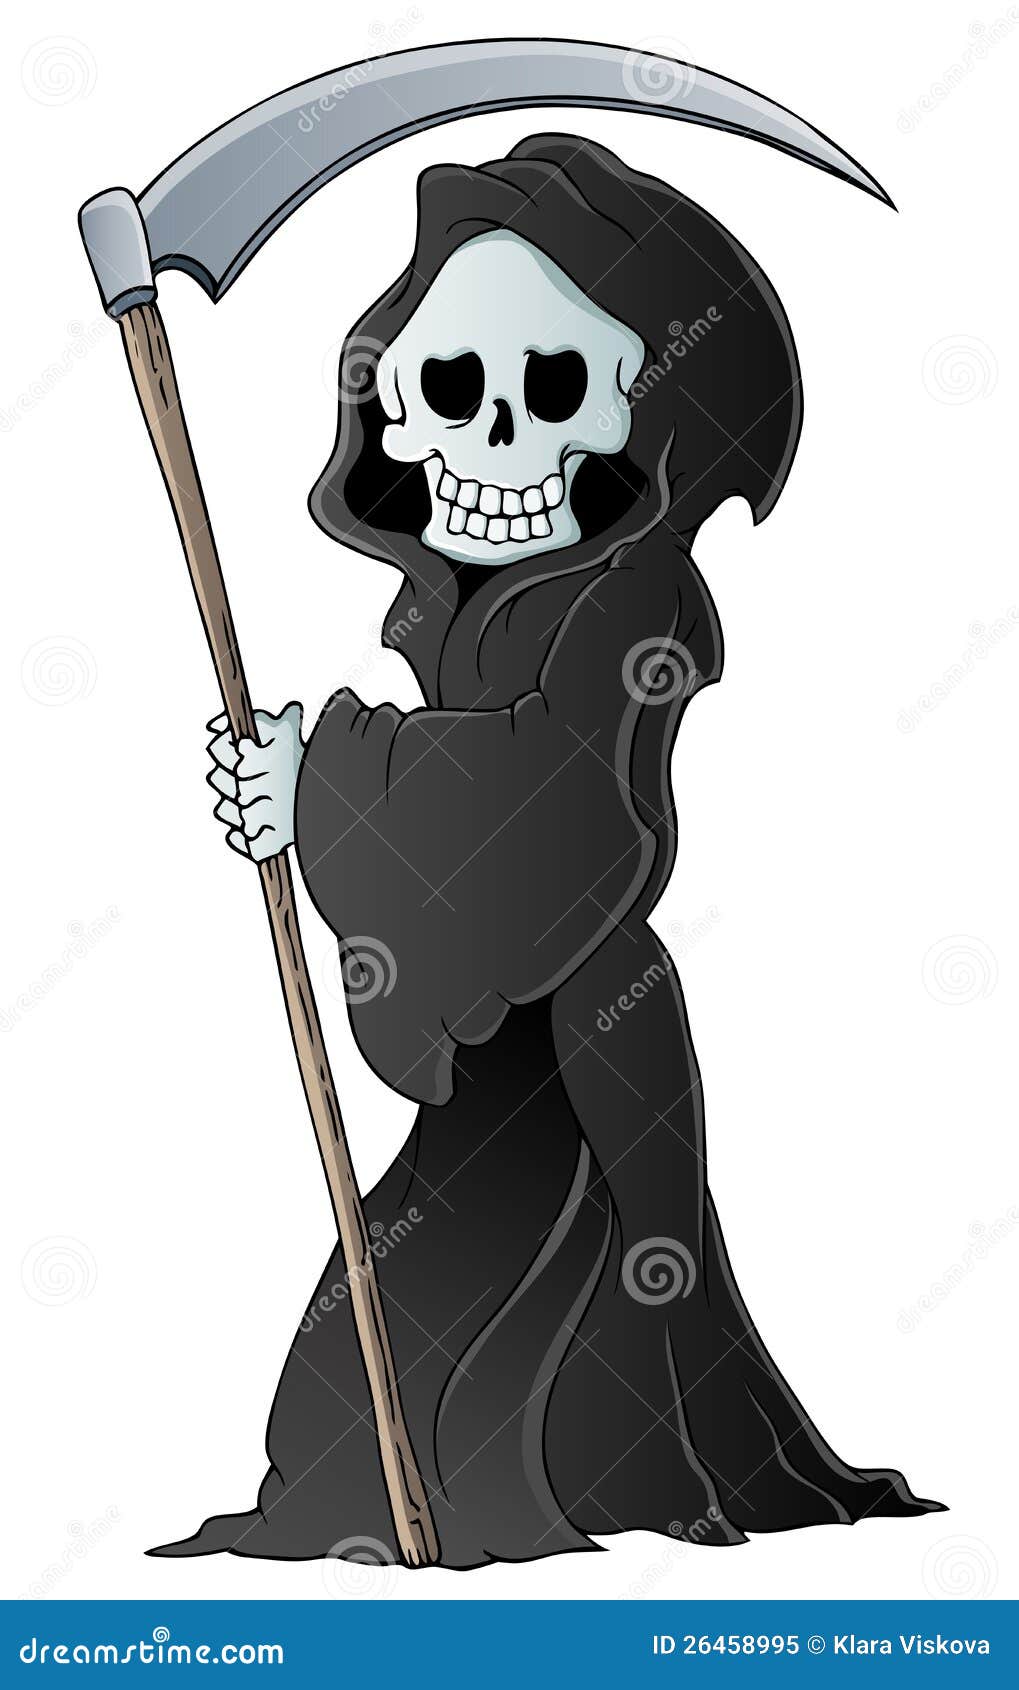 Grim reaper theme image 3 stock vector. Illustration of mystery - 26458995